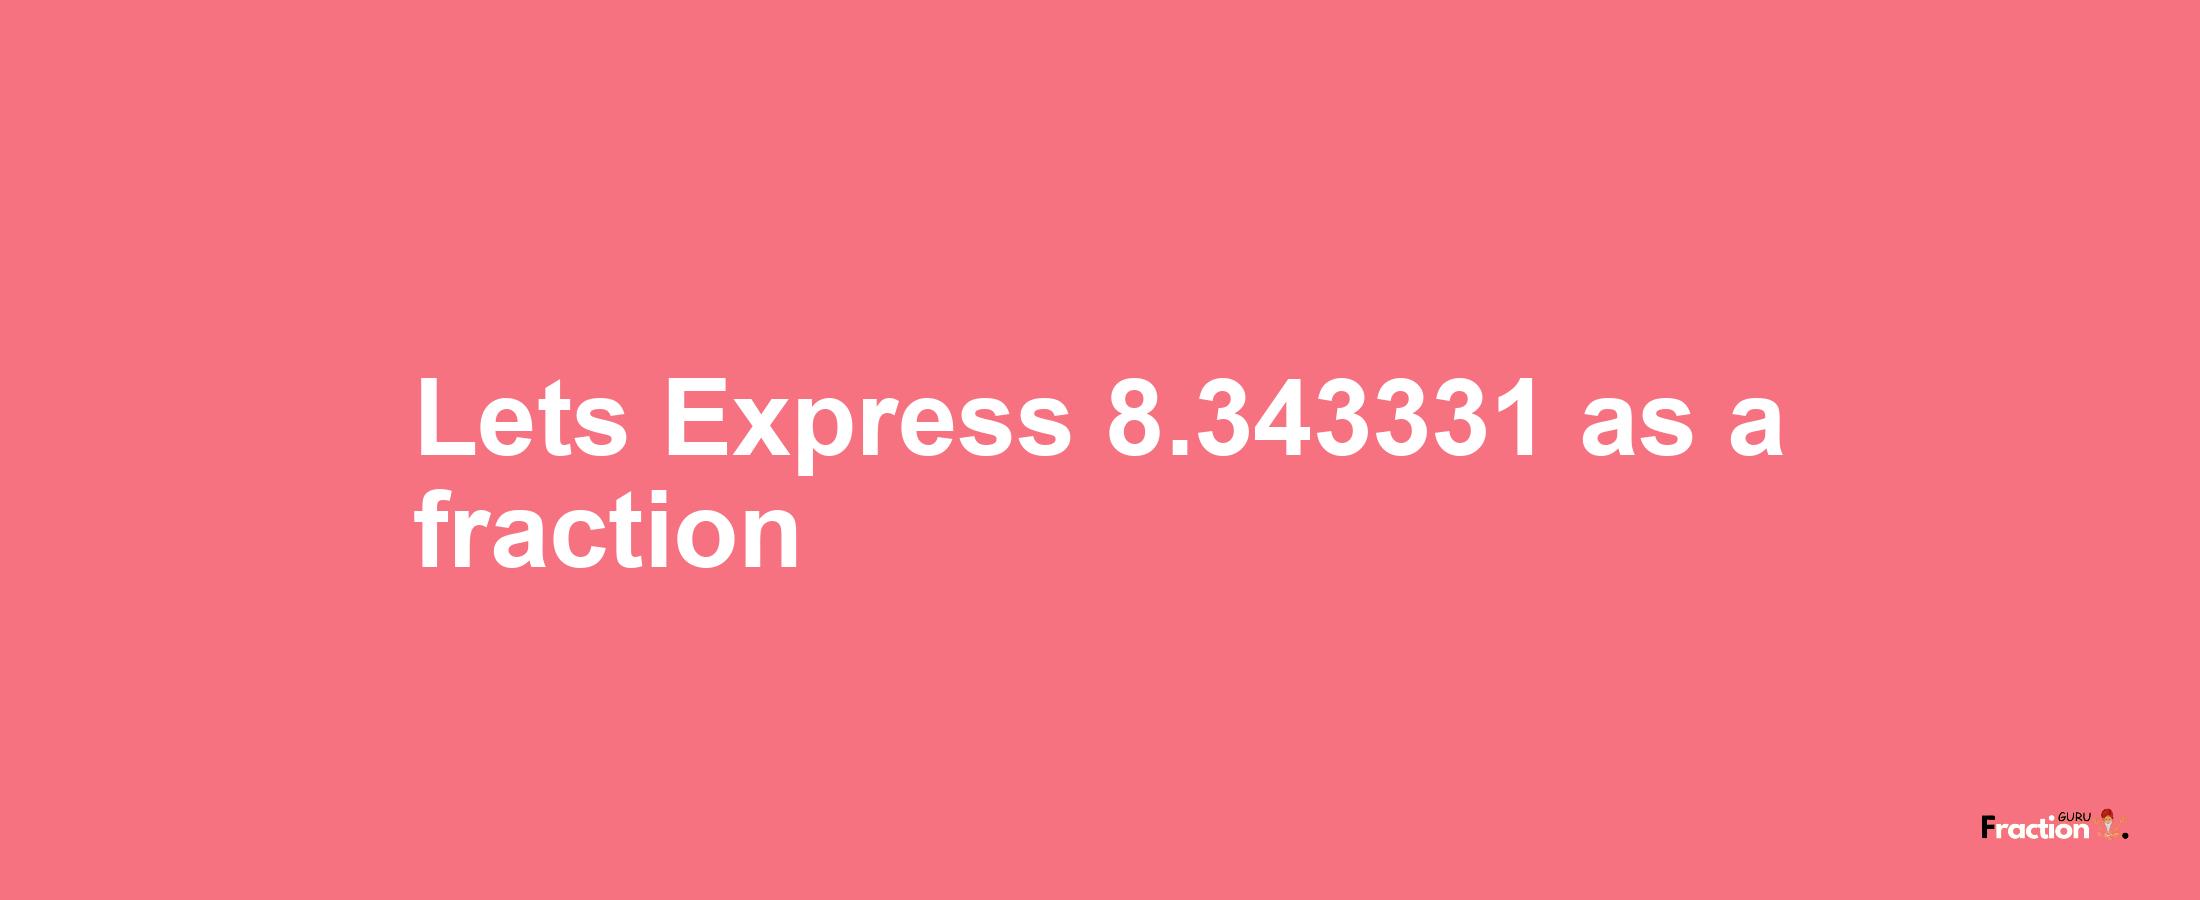 Lets Express 8.343331 as afraction